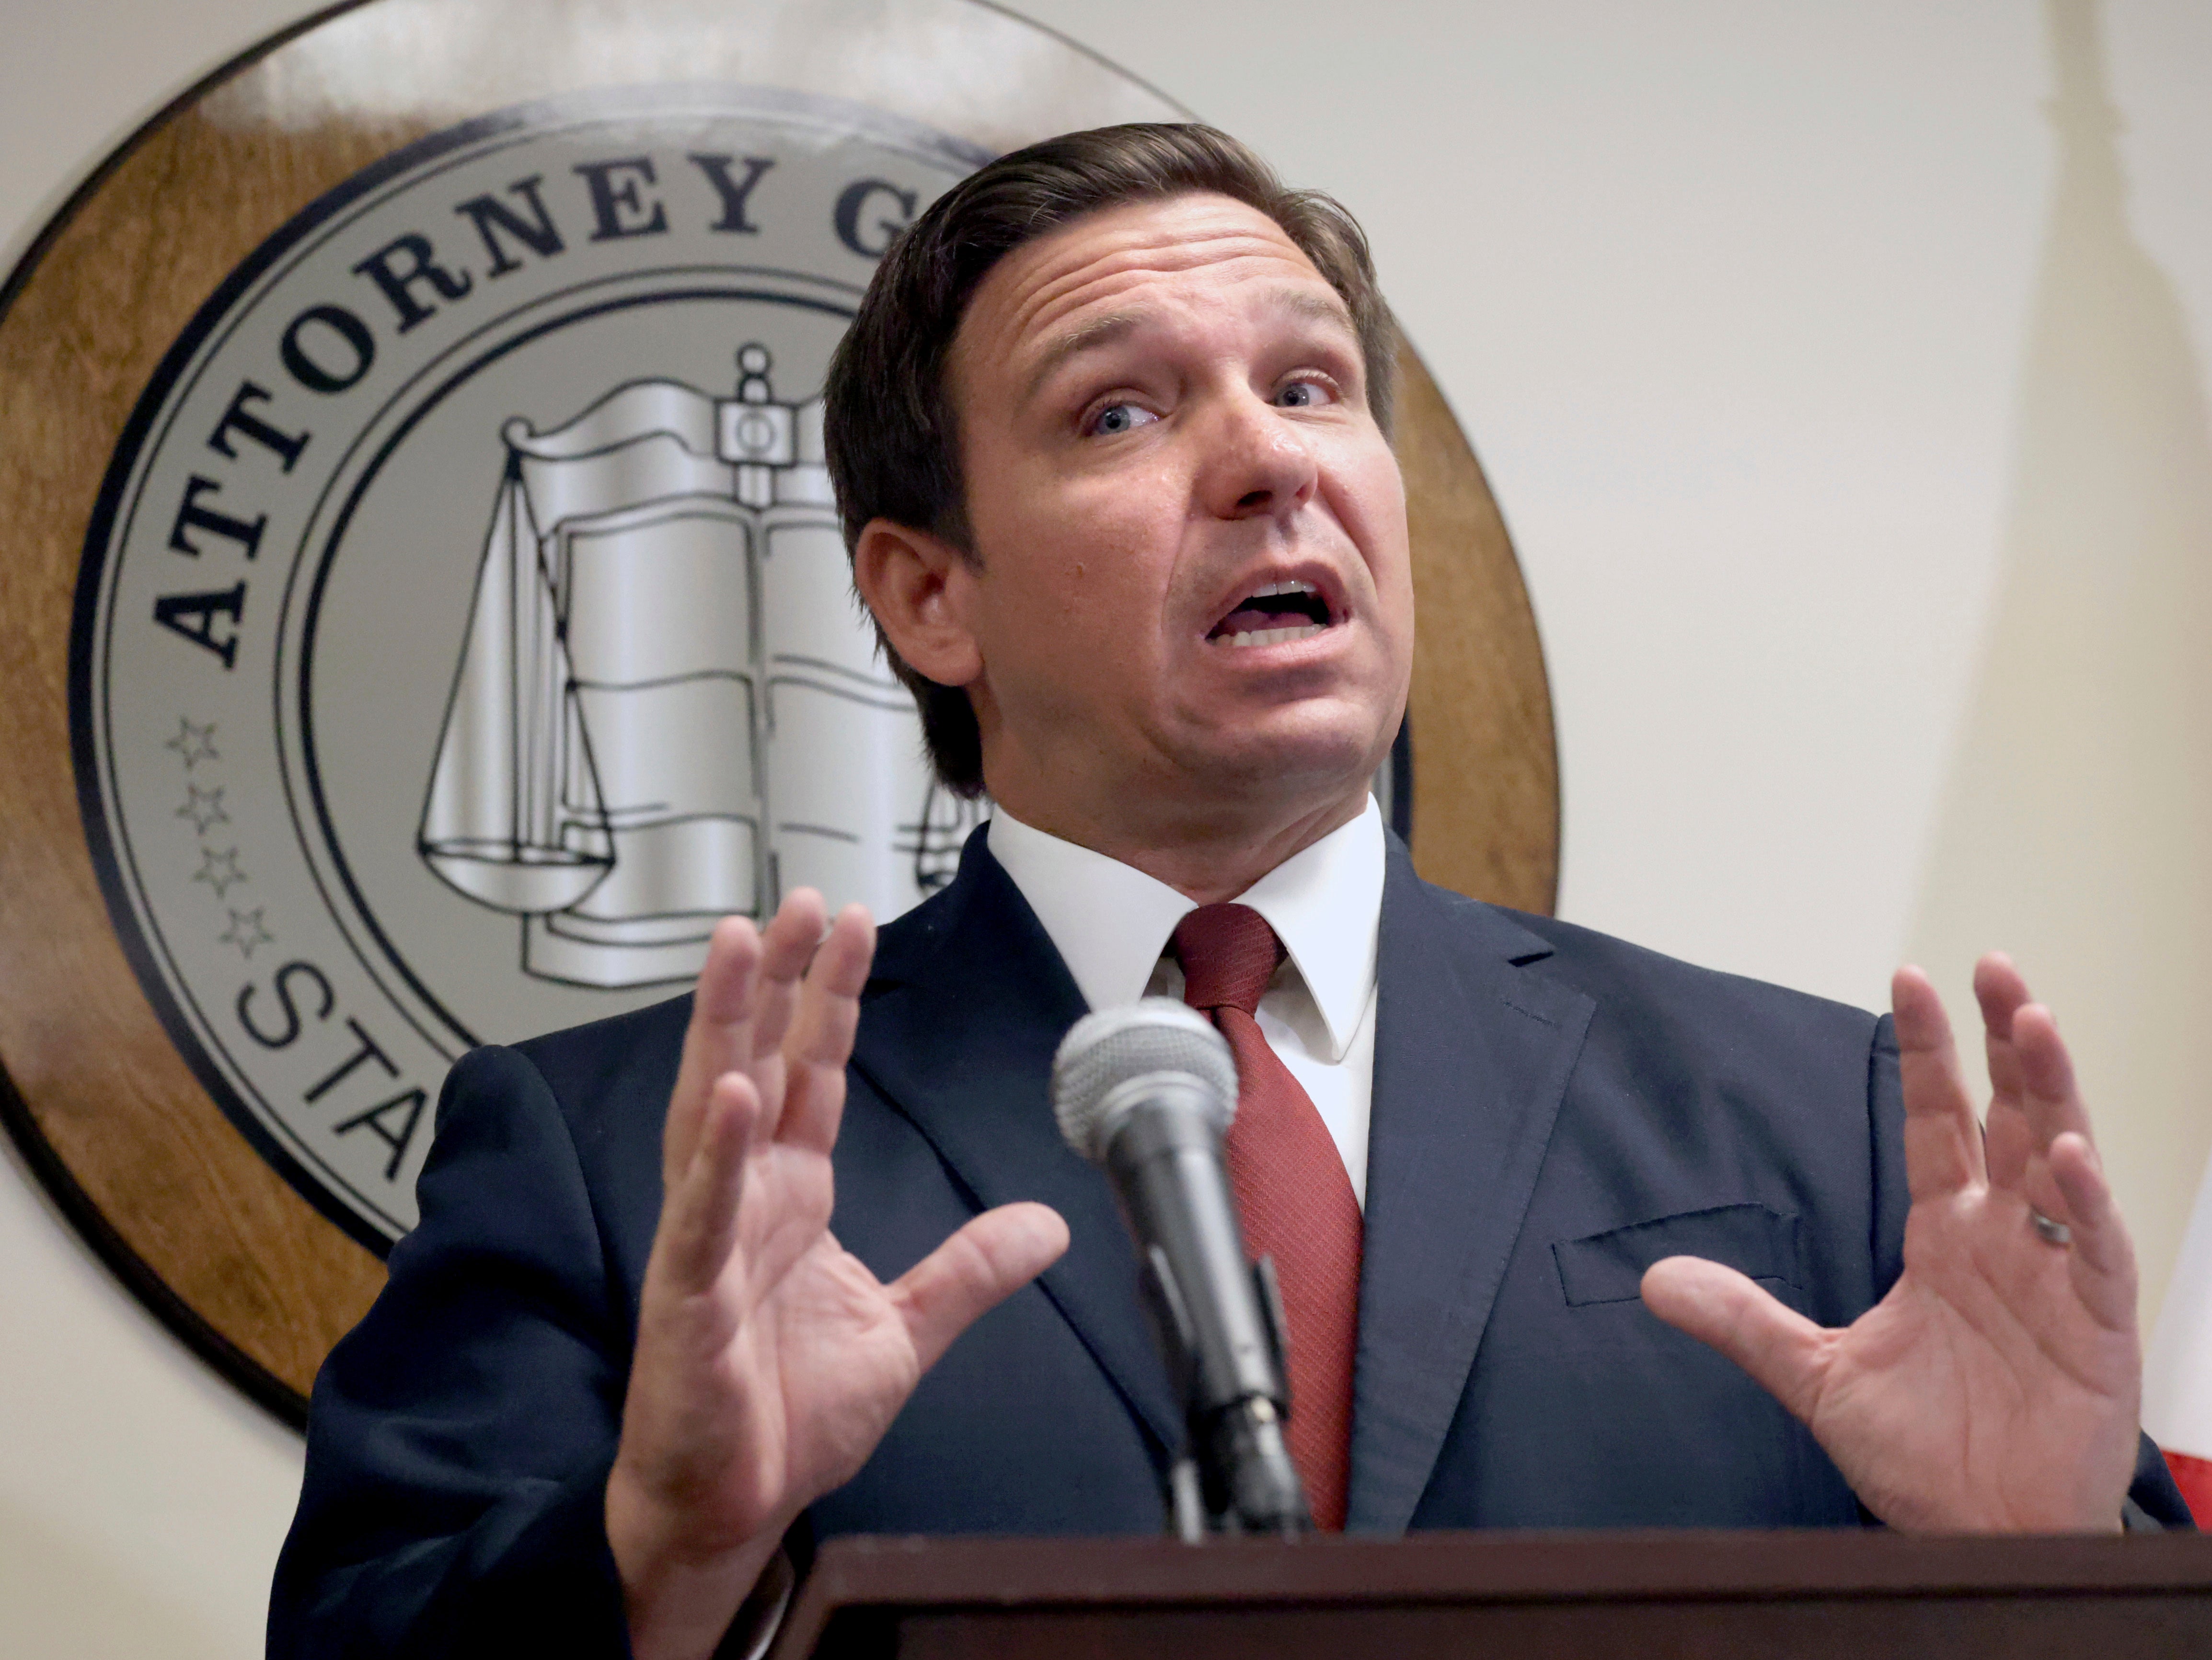 Florida governor Ron DeSantis responds to a question during a press conference with Florida attorney general Ashley Moody in Orlando on Thursday